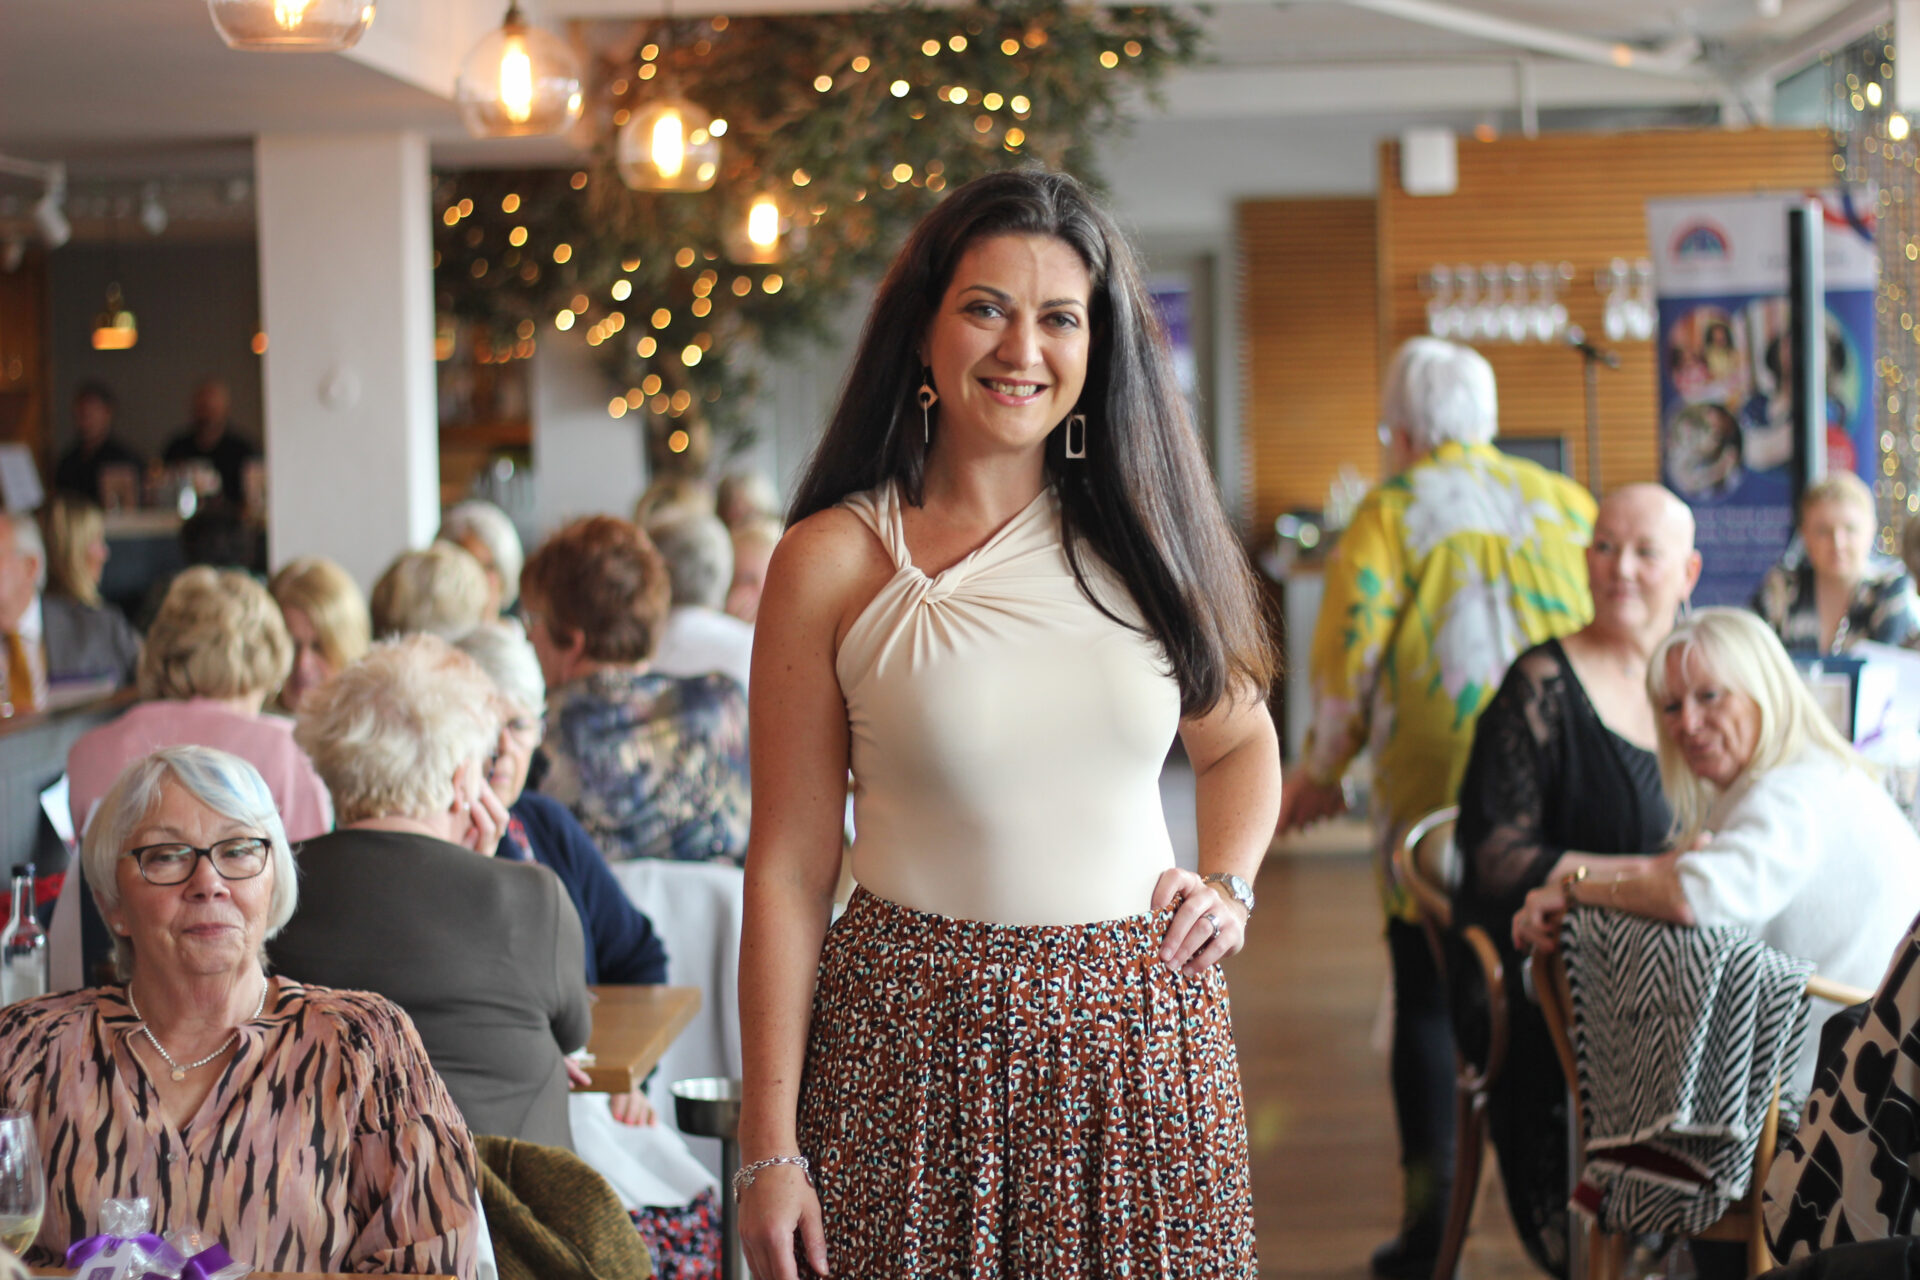 Woman wearing a cream top and brown skirt stood in a restaurant